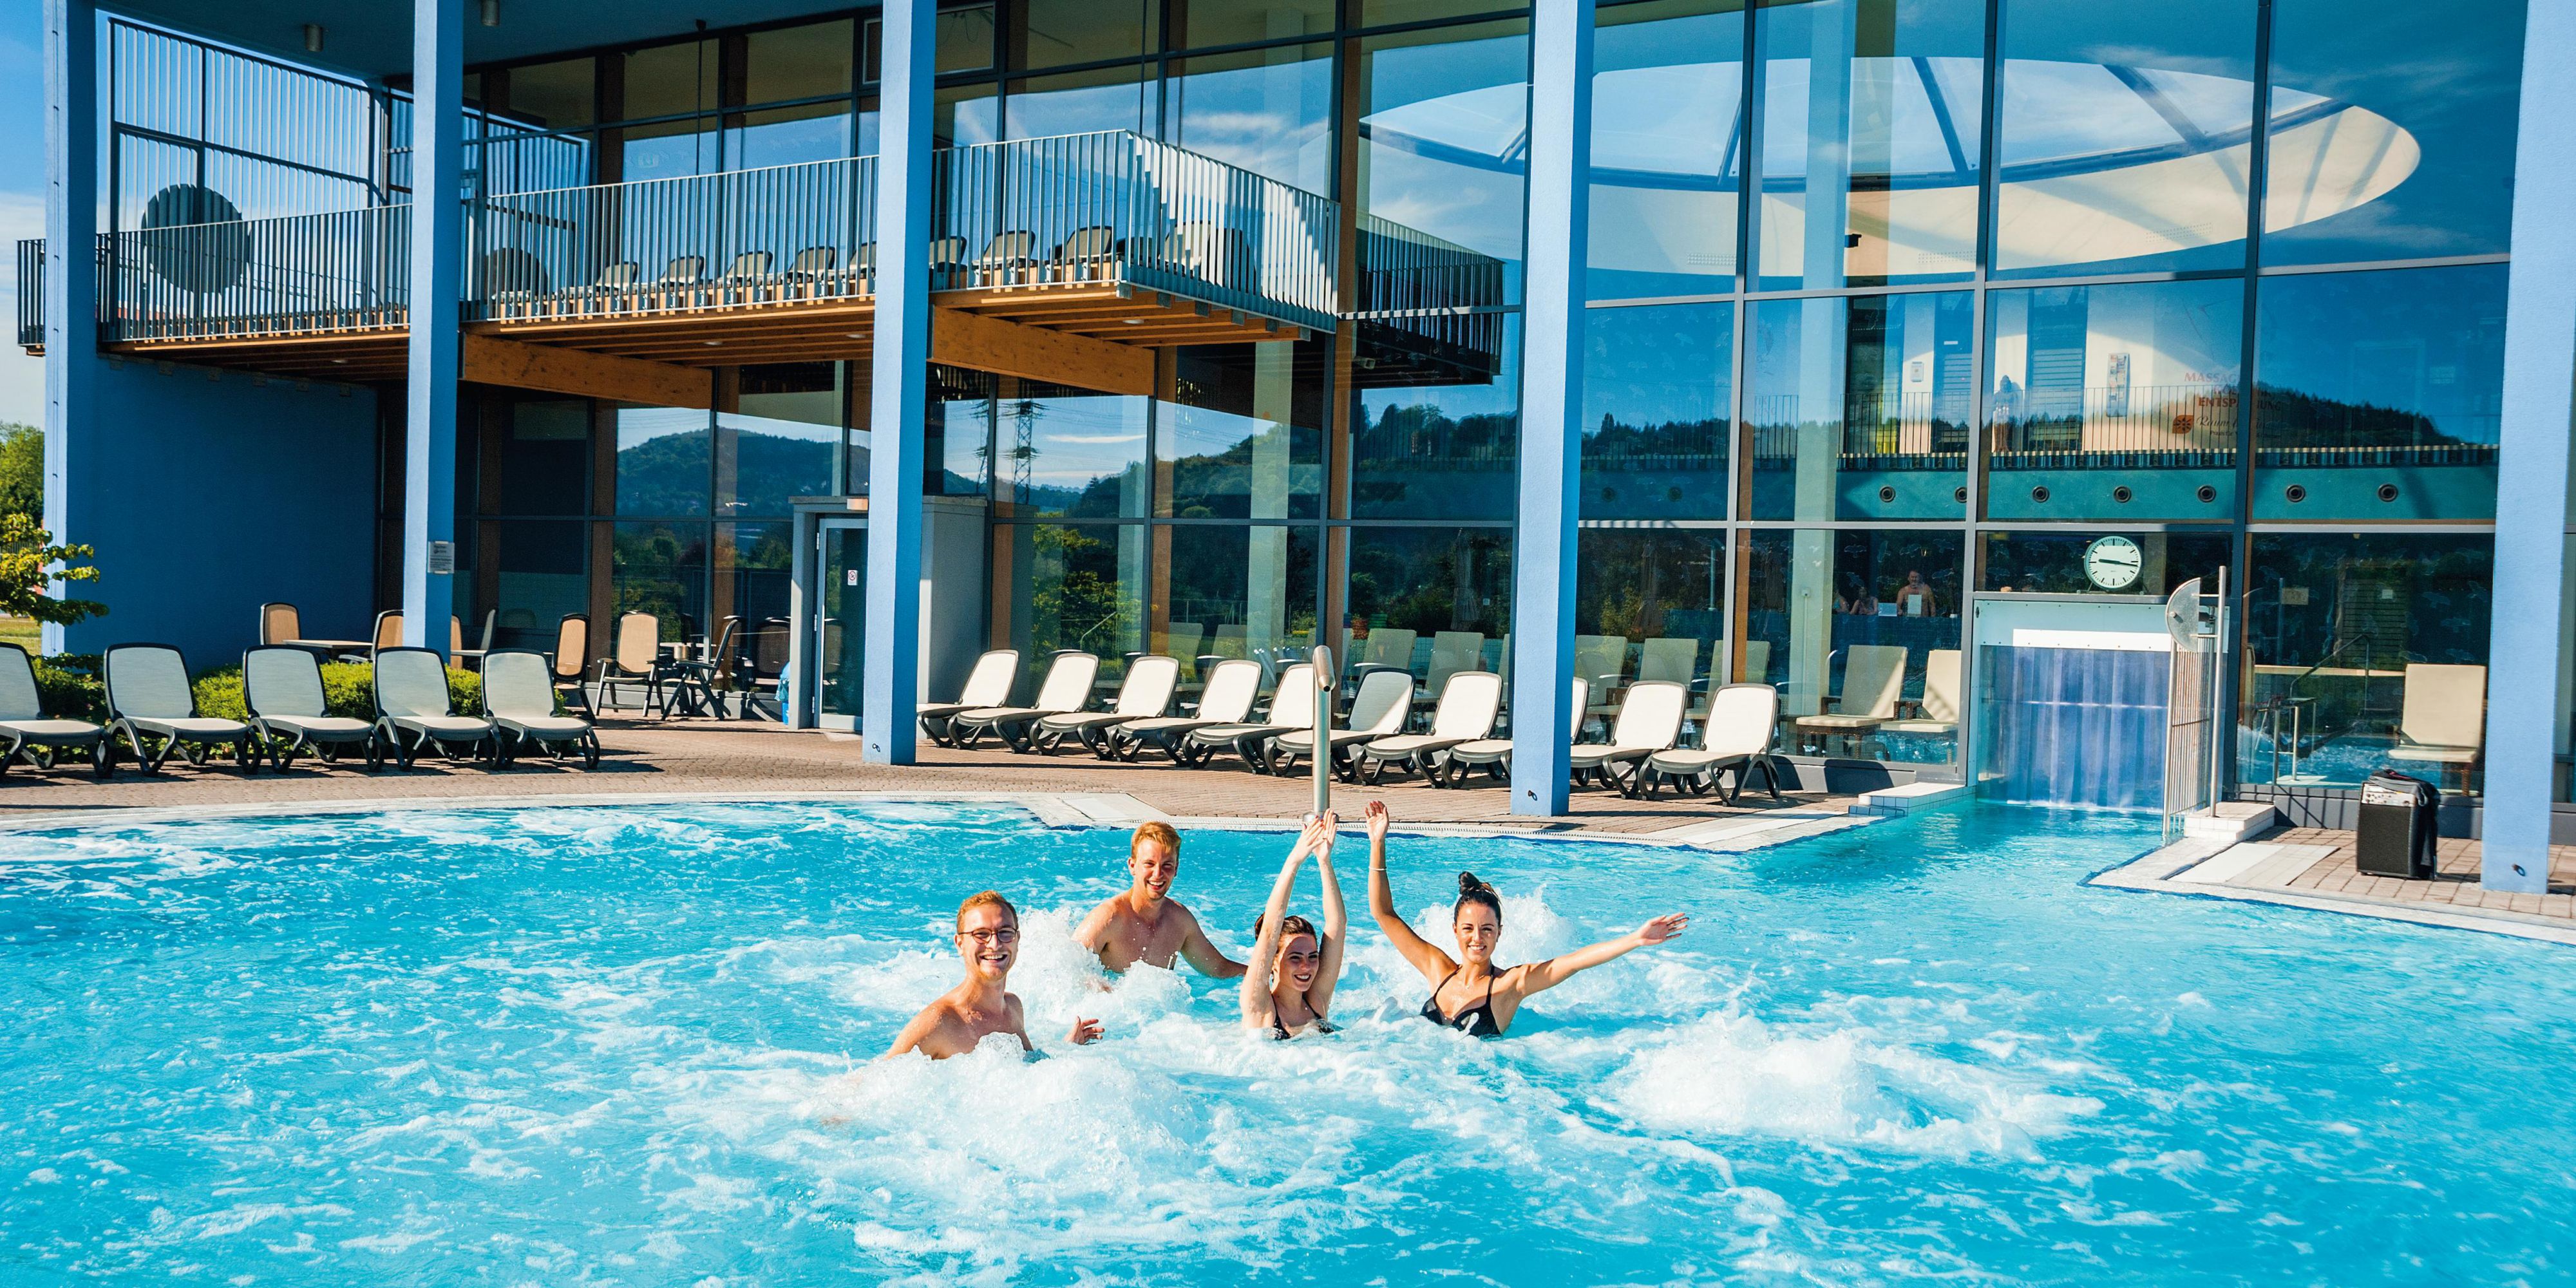 Das Bad Merzig - Immerse yourself in a world of wellbeing close to you with a 5 star premium sauna area, relaxed massage and cosmetic applications, water worlds of wellbeing and the unique Bietzen healing water.